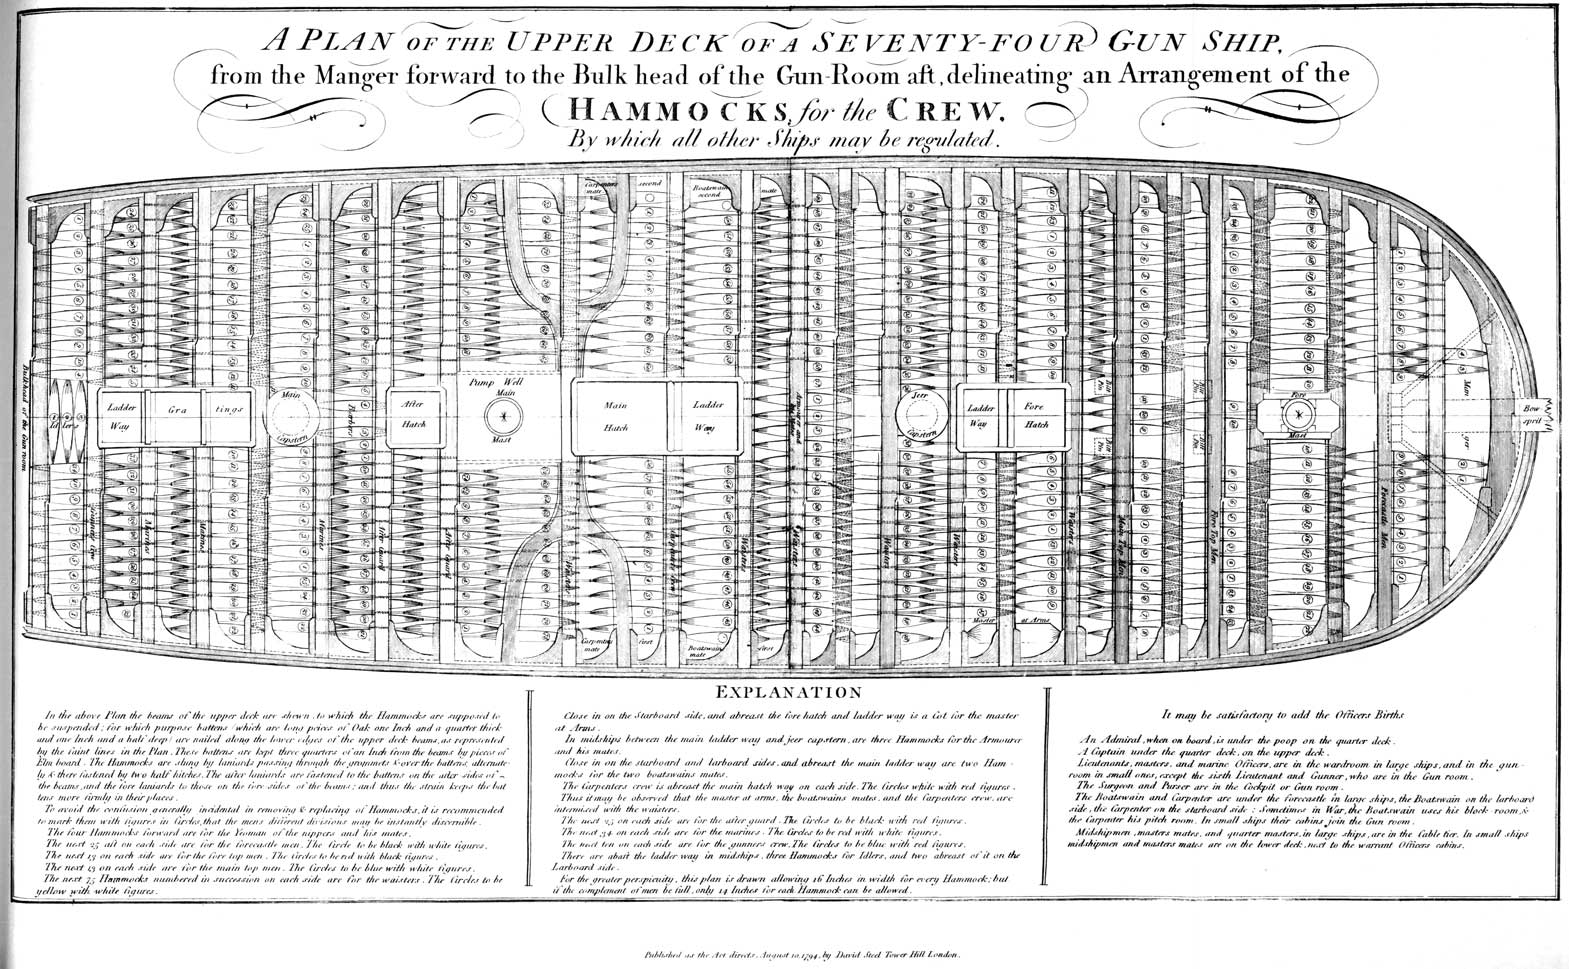 A Plan for the Upper deck Of A Seventy Four Gun Ship.
Hammocks for the Crew
EXPLANATION
In the above Plan the beams of the upper deck are shewn to which the Hammocks are supposed to be suspended; for which purpose battens (which are long pieces of Oak on Inch and a quarter thick and one Inch and a half deep) are nailed along the lower edges of the upper deck beams, as represented by the faint lines in the Plan.  These battens are kept three quarters of an Inch from the beams by pieces of Elm board.  The Hammocks are slung by laniards passing through the grommets over the battens alternately there fastened by two half hitches.  The after laniards are fastened to the battens on the after-sides of the beams, and the fore laniards to those on the fore-sides of the beams; and thus the strain keeps the battens more firmly in their places.
To avoid confusion generally incidental in removing and replacing of hammocks, it is recommended to mark them with figures in Circles, that the mens different divisions may be instantly discernible.
The four Hammocks forward are for Yeoman of the nippers and his mates.
The next 25 aft on each side are for the forecastle men.  The Circle to be black with white figures.
The next 13 on each side are for the fore top men.  The Circles to be red with black figures.
The next 13 on each side are for the main top men.  The Circles to be blue with white figures.
The next Hammocks numbered in succession on each side are for the waisters.  The Circles to be yellow with white figures.

Close in on the Starboard side, and abreast the fore hatch and ladder way is a Cot for the master of Arms.
In midships between the main ladder way and the jeer capstern, are three Hammocks for the Armourer and his mates.
Close in on the starboard and larboard sides, and abreast the main ladder way are two Hammocks for the two boatswains mates.
The Carpenters crew is abreast the main hatch way on each side.  The Circles white with red figures.
Thus it may be observed that the master of arms, the boatswains mates and the Carpenters crew are intermixed with the waisters.
The next 25 on each side are for the after guard.  The Circles to be black with red figures.
The next 34 on each side are for marines. The Circles to be red with white figures.
The next ten on each side are for gunners crew. The Circles to be blue with red figures.
There are abaft the ladder way in midships, the Hammocks for Idlers, and two abreast of it on the Larboard side.
For the greater perspicuity, this plan is drawn allowing 16 Inches in width for every Hammock; but if the complement of men be full, only 14 Inches for each Hammock can be allowed.

It may be satisfactory to add the Officers Births
An Admiral, when on board, is under the poop on the quarter deck.
A Captain under the quarter deck, on the upper deck.
Lieutenants, masters and marine Officers, are in the wardroom in large ships, and in the gun room on small ones, except the sixth Lieutenant and Gunner, who are in the Gun room.
The Surgeon and Purser are in the Cockpit or Gun room.
The Boatswain and Carpenter are under the forecastle in large ships, the Boatswain on the larboard side, the Carpenter on the starboard side: Sometimes in War, the Boatswain uses his block room and the Carpenter his pitch room.  In small ships their cabins join the Tun room.
Midshipmen, masters mates, and quarter masters, in large ships, are in the Cable tier. In small ships midshipmen and masters mates are on the lower deck, next to the warrant Officers cabins.